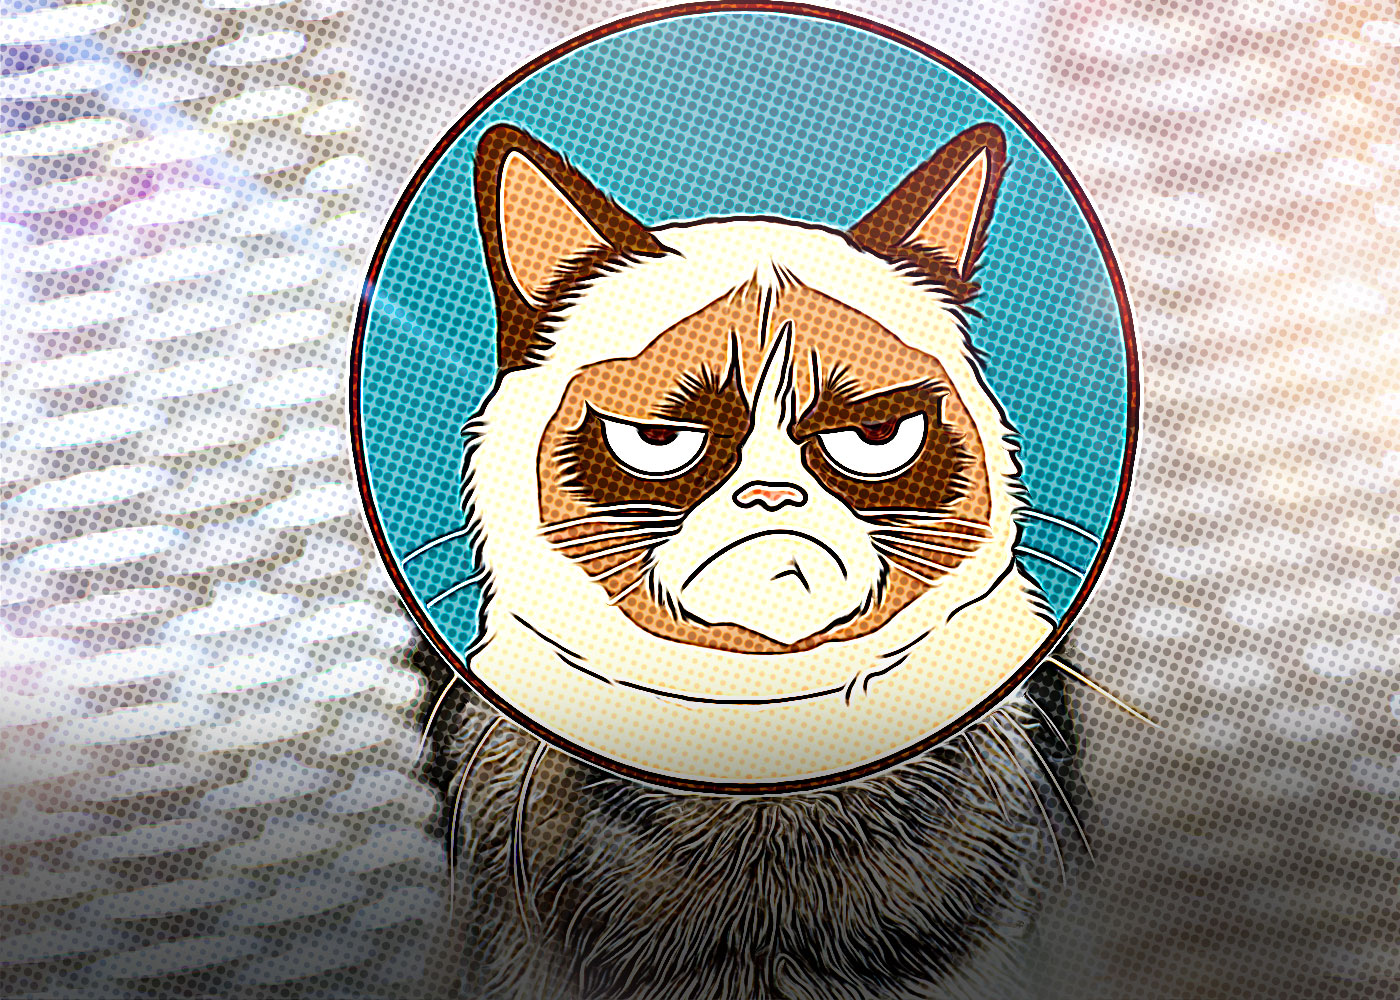 Grumpy Cat Meme Token Sparks Copyright Controversy in the NFT Space = The Bit Journal